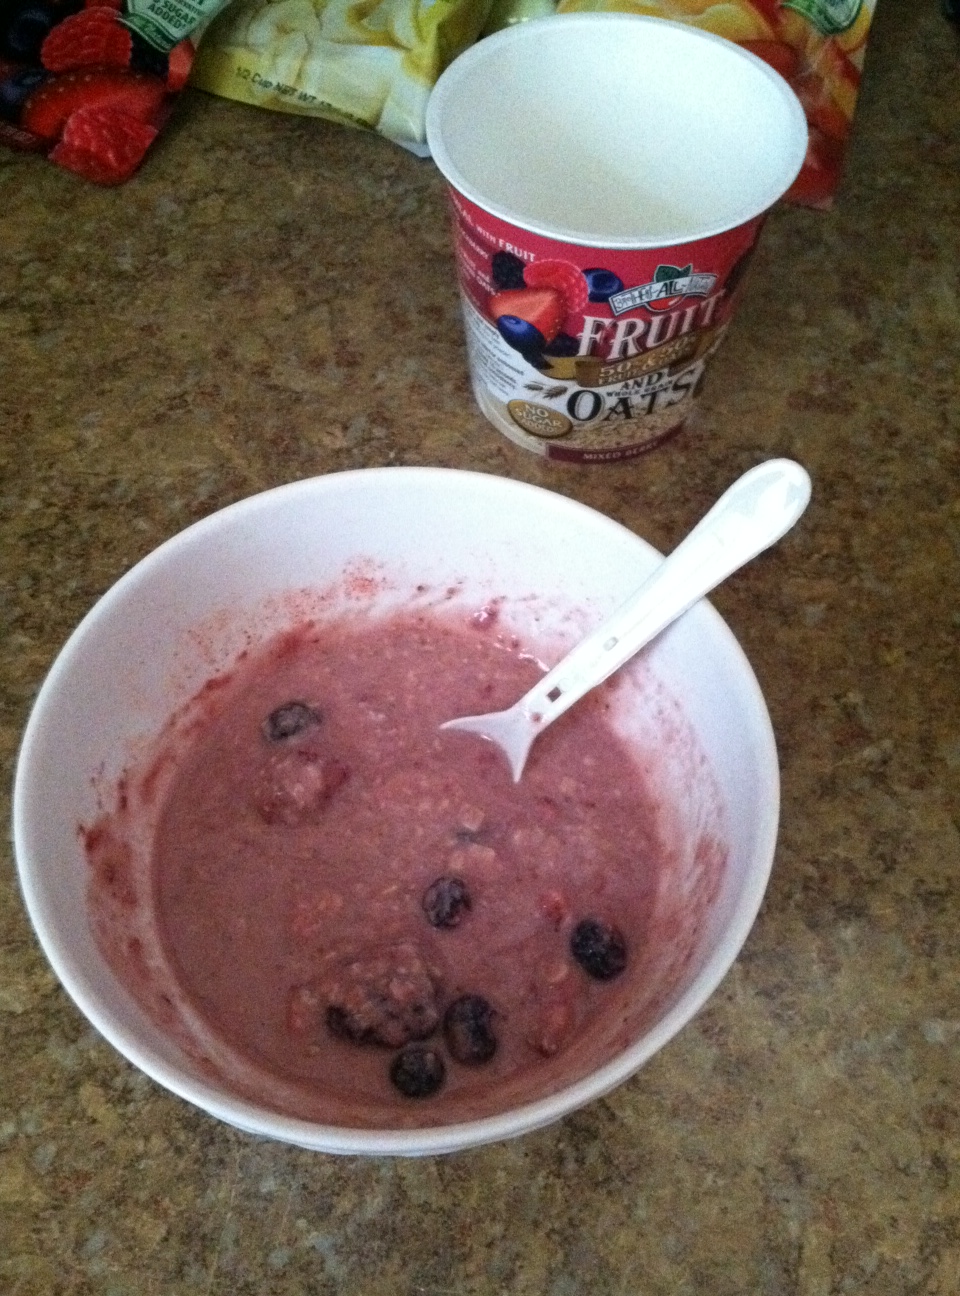 I used the entire fruit packet which included a fruit "powder" which made my oatmeal pink